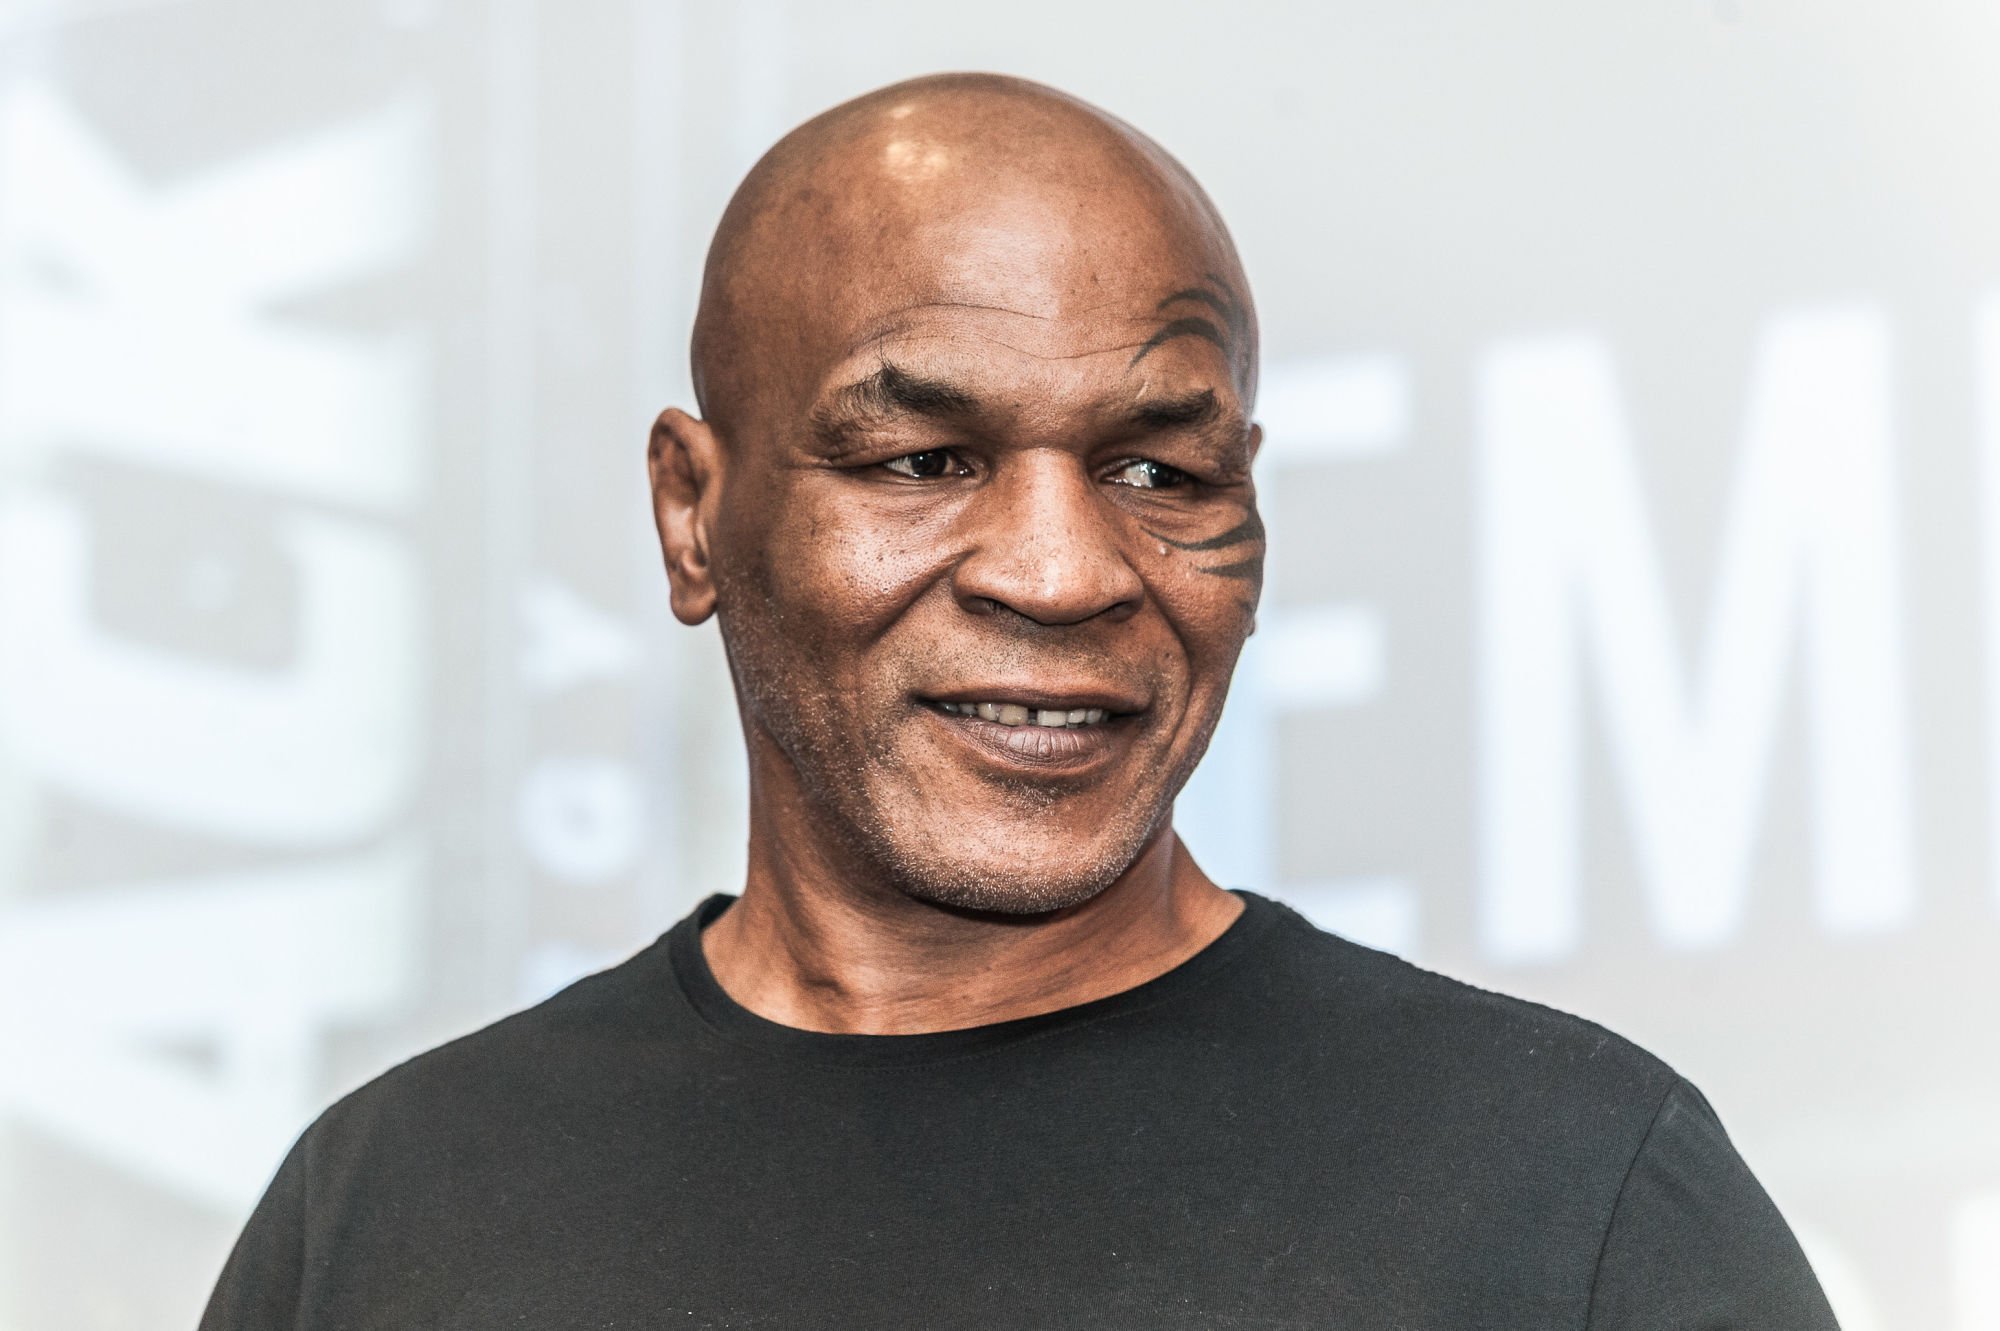 Mike Tyson in Warsaw promotes Black energy drink on 26th June 2019
Photo : Newspix / Icon Sport